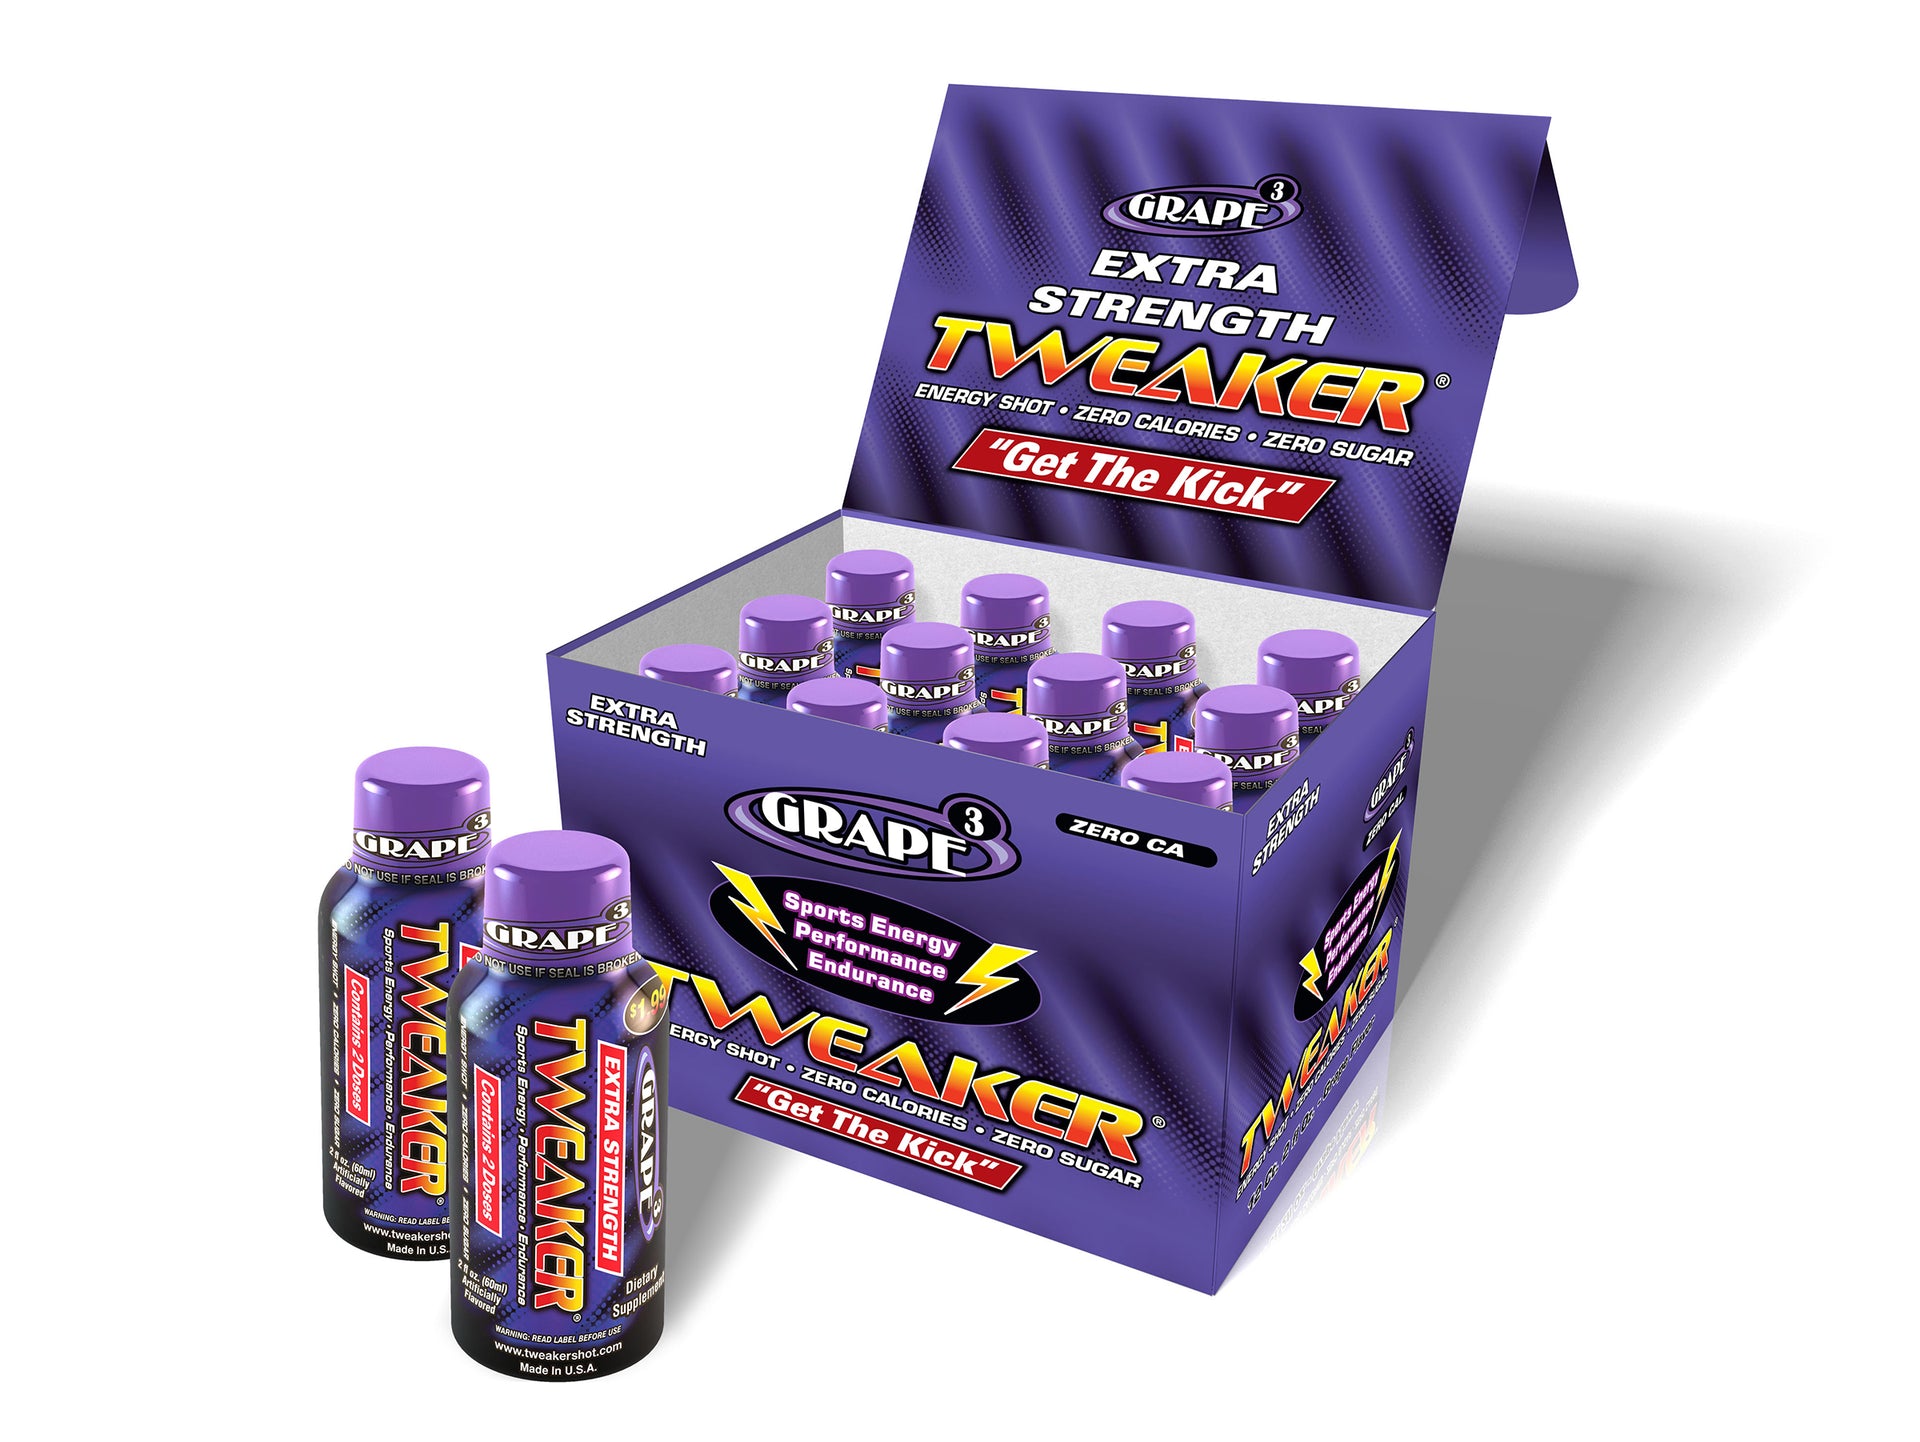 Image shows 12-ct caddy of Extra Strength Tweaker Energy Shot, Grape flavor